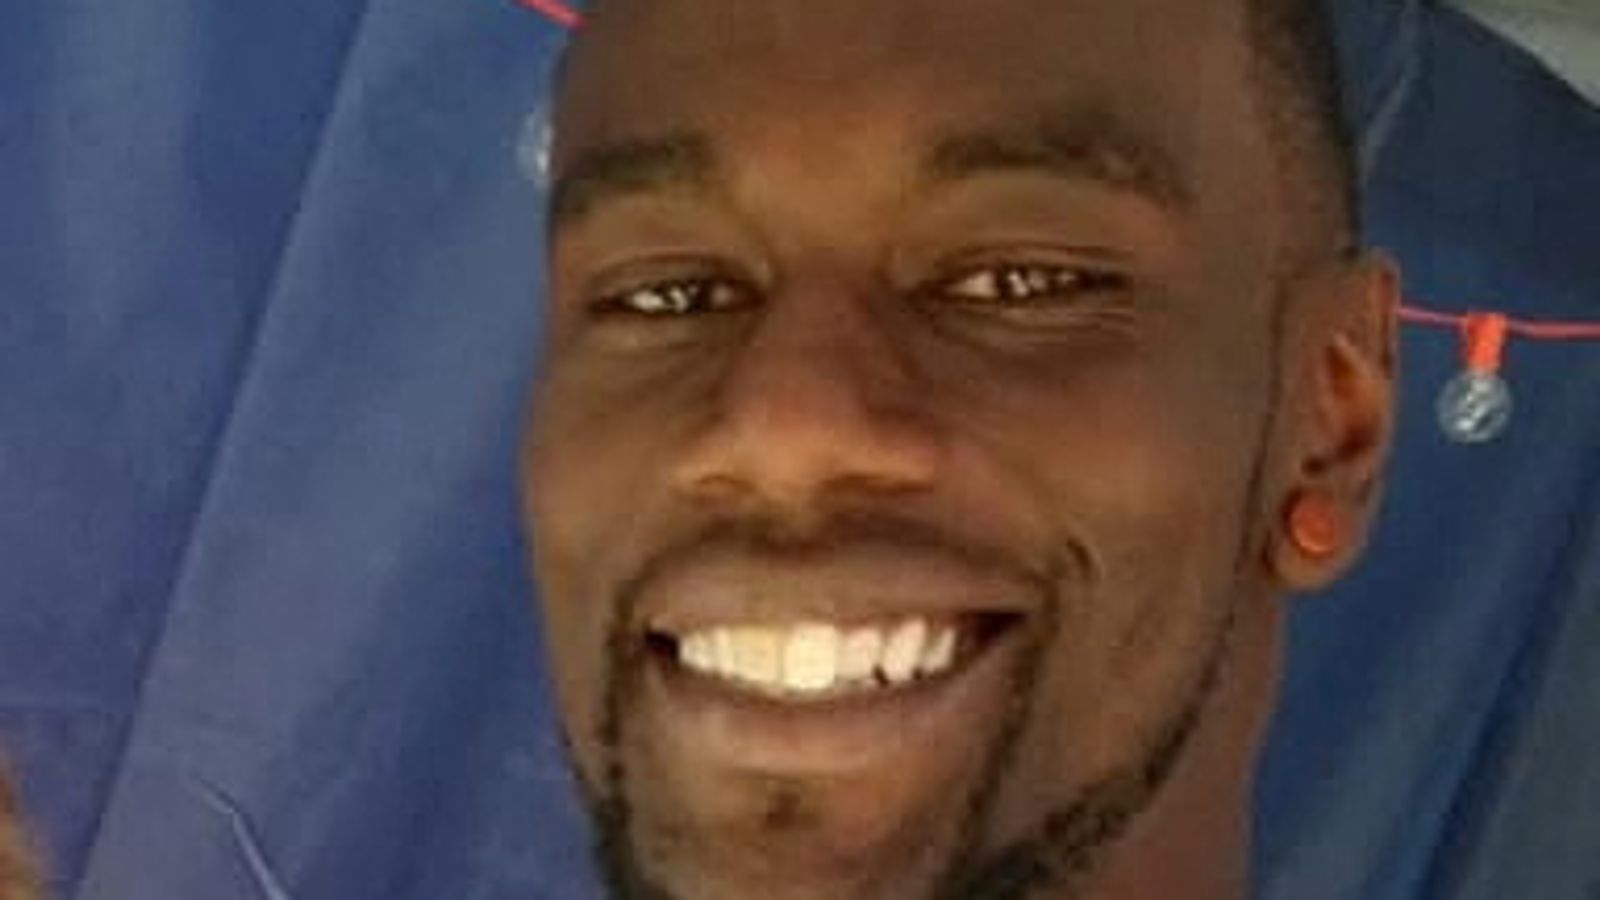 Tyre Nichols: Last words of US man who died after police 'beating' were 'mum, mum, mum', says lawyer